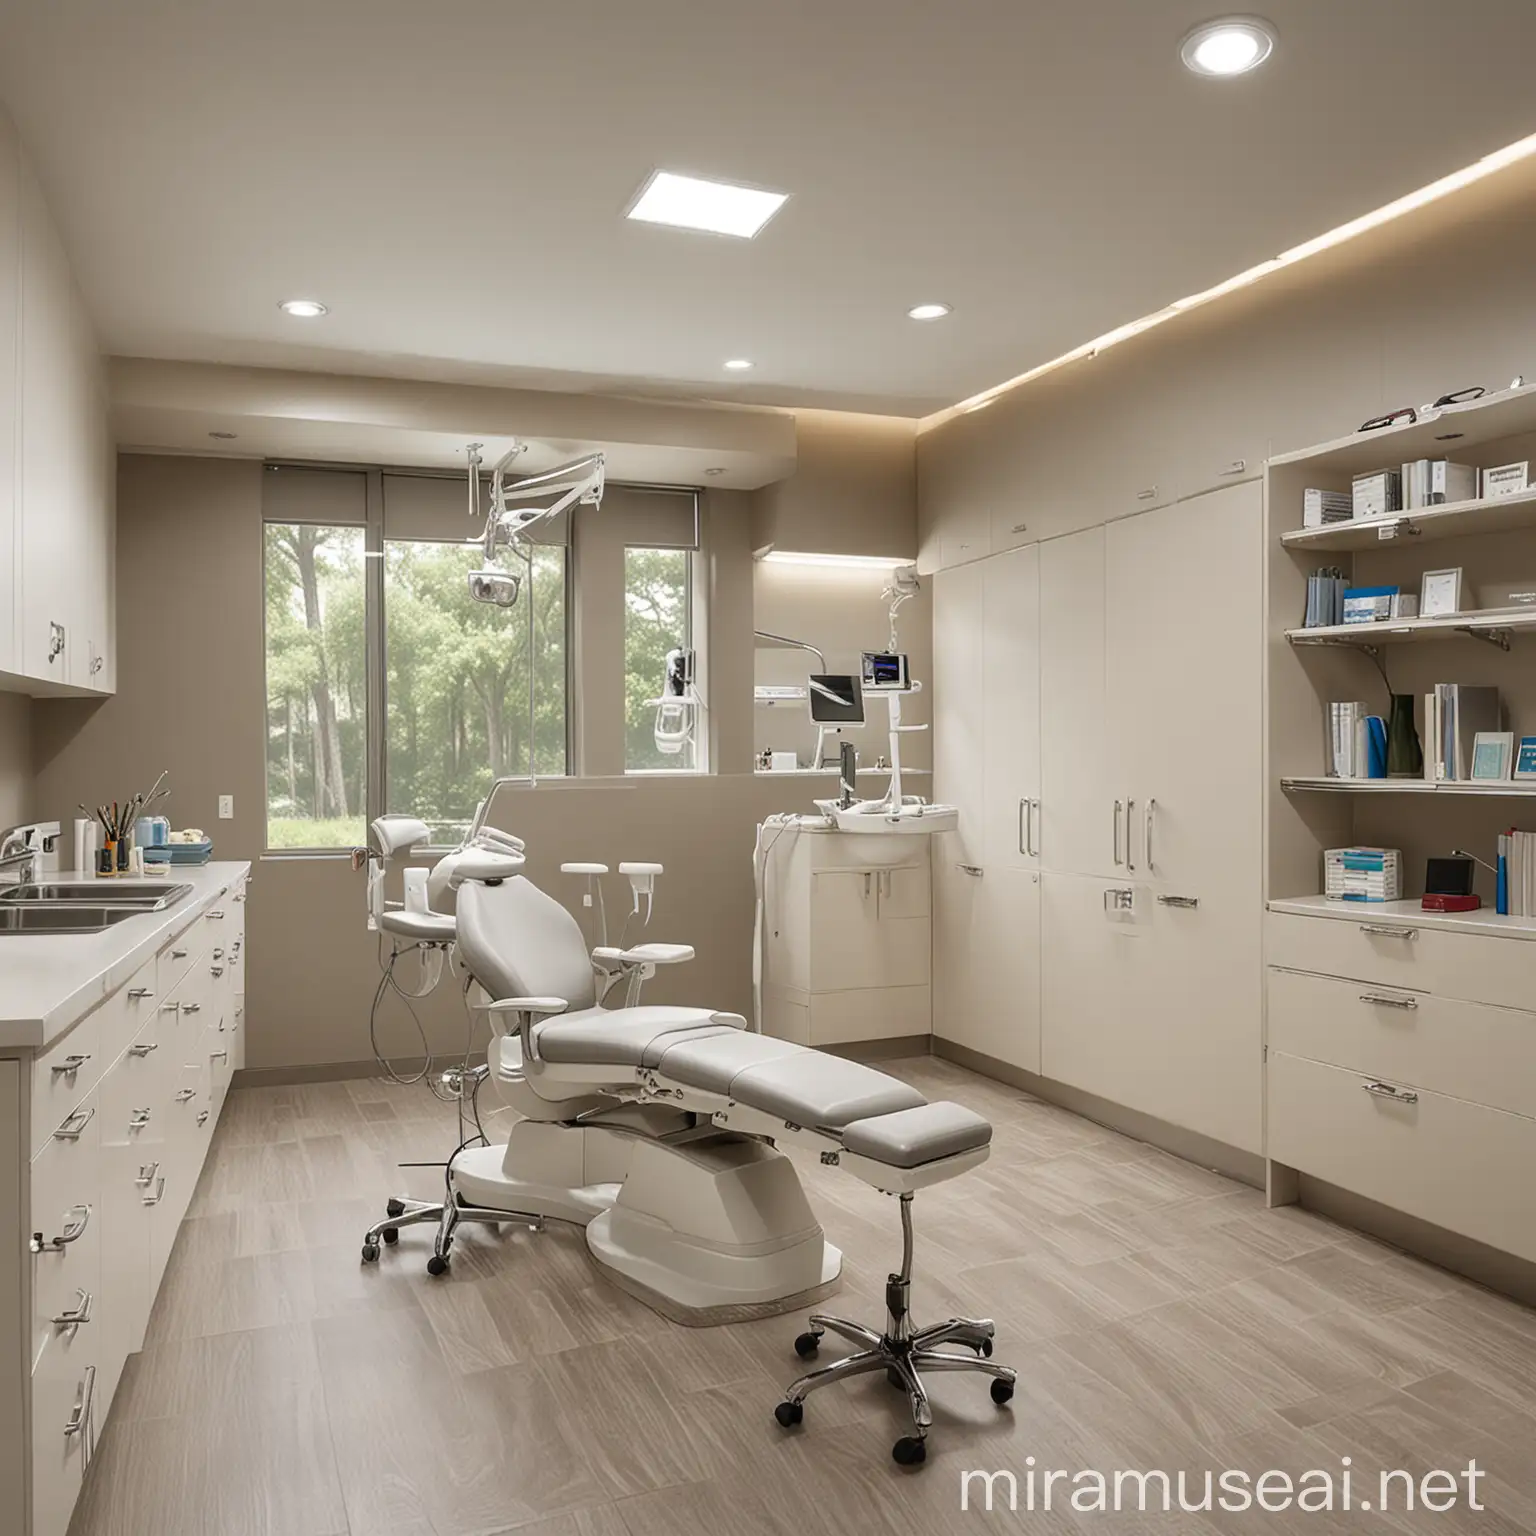 Create an efficient and modern dental doctor cabin within a compact 150 sqft space. Prioritize functionality and ergonomic design to maximize productivity and comfort for the practitioner. Select sleek and space-saving dental chairs and equipment with streamlined profiles to optimize use of space. Utilize innovative storage solutions such as built-in cabinets and wall-mounted shelving to minimize clutter and maintain an organized workspace. Integrate advanced technology like digital imaging systems and computer-aided design tools seamlessly into the cabin design to enhance diagnostic capabilities and treatment planning. Ensure adequate task lighting and adjustable fixtures to provide optimal illumination for procedures. Incorporate smart features for equipment control and patient communication to streamline workflows and improve patient experience. Despite the limited space, maintain a modern aesthetic with clean lines, neutral color palette, and contemporary finishes to create a professional and inviting atmosphere.